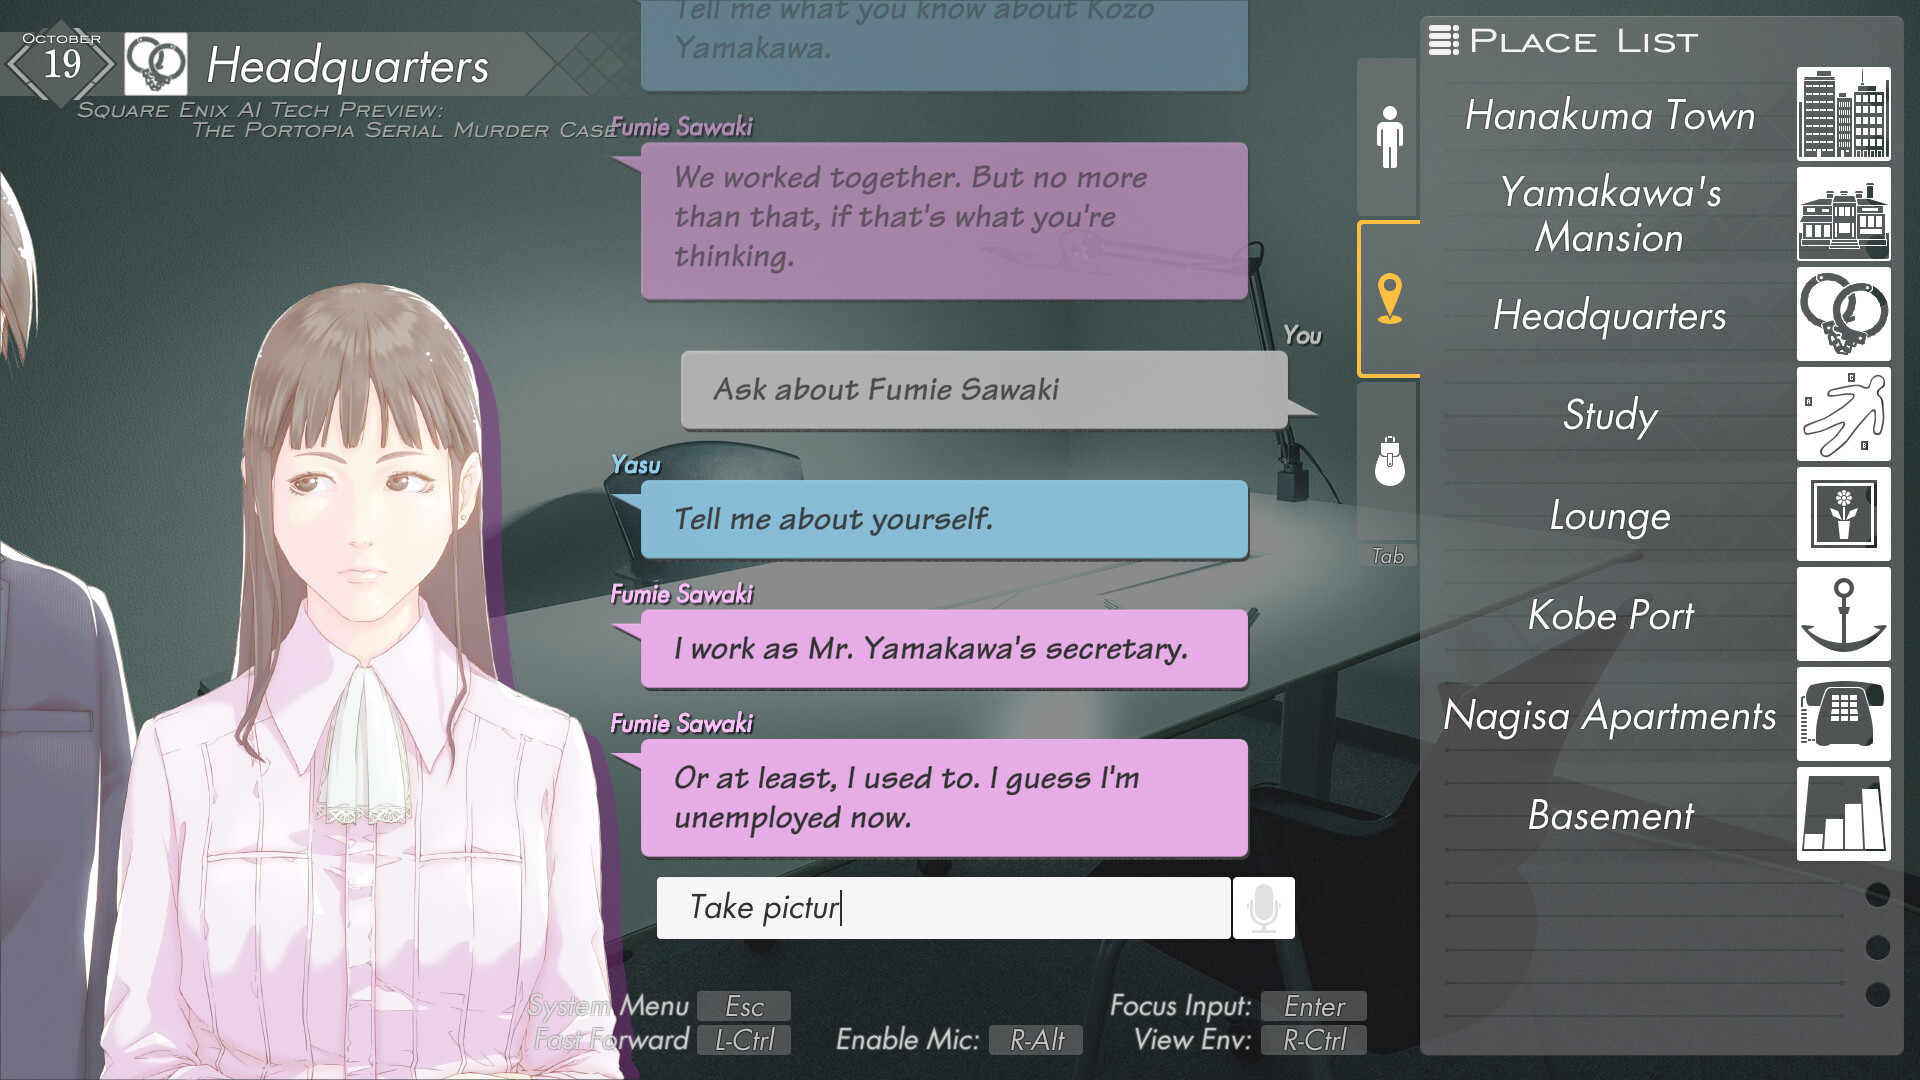 A screenshot of The Portopia Serial Murder Case, depicting a woman being interrogated by police detectives.